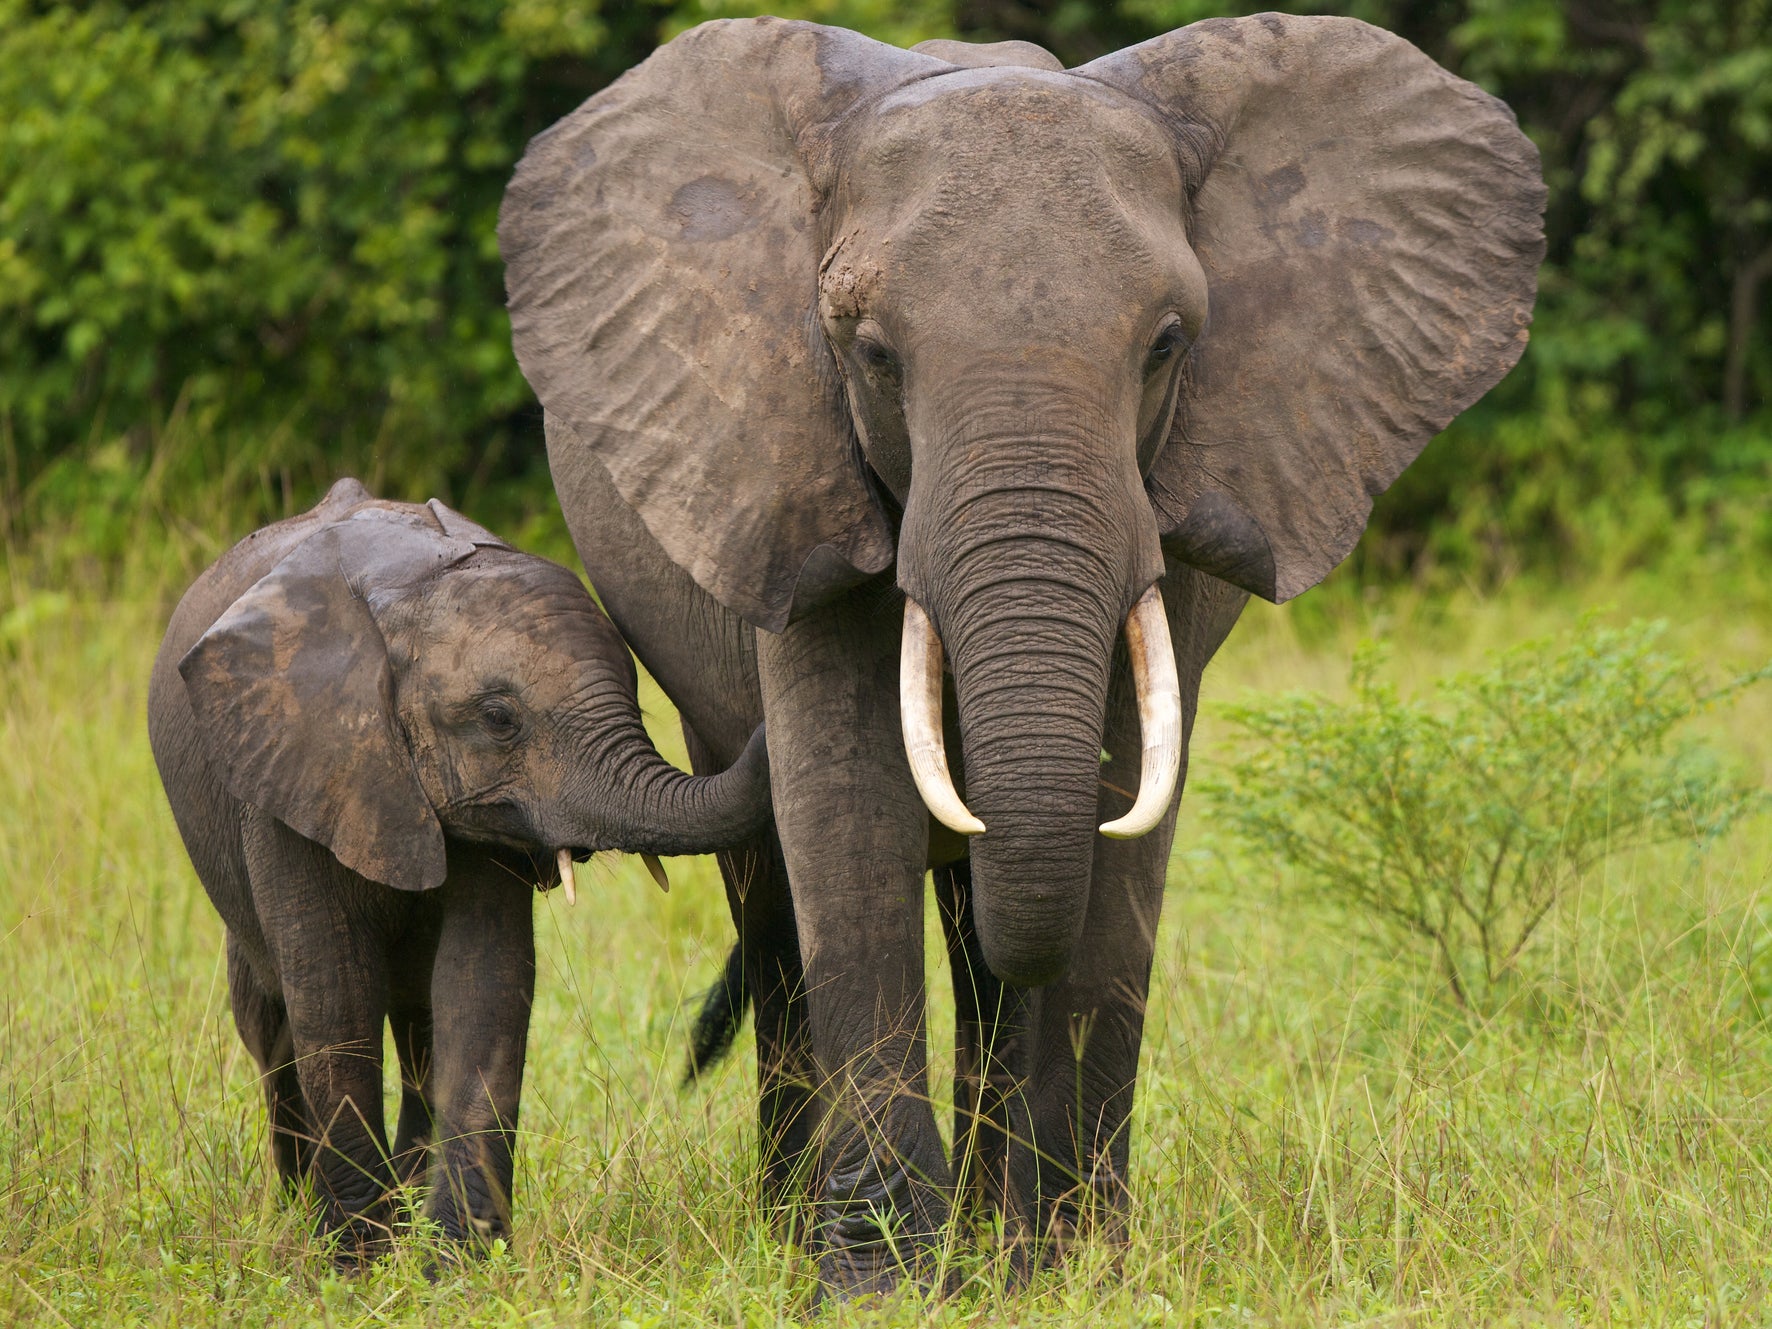 Around 55 African elephants are killed every day for their ivory